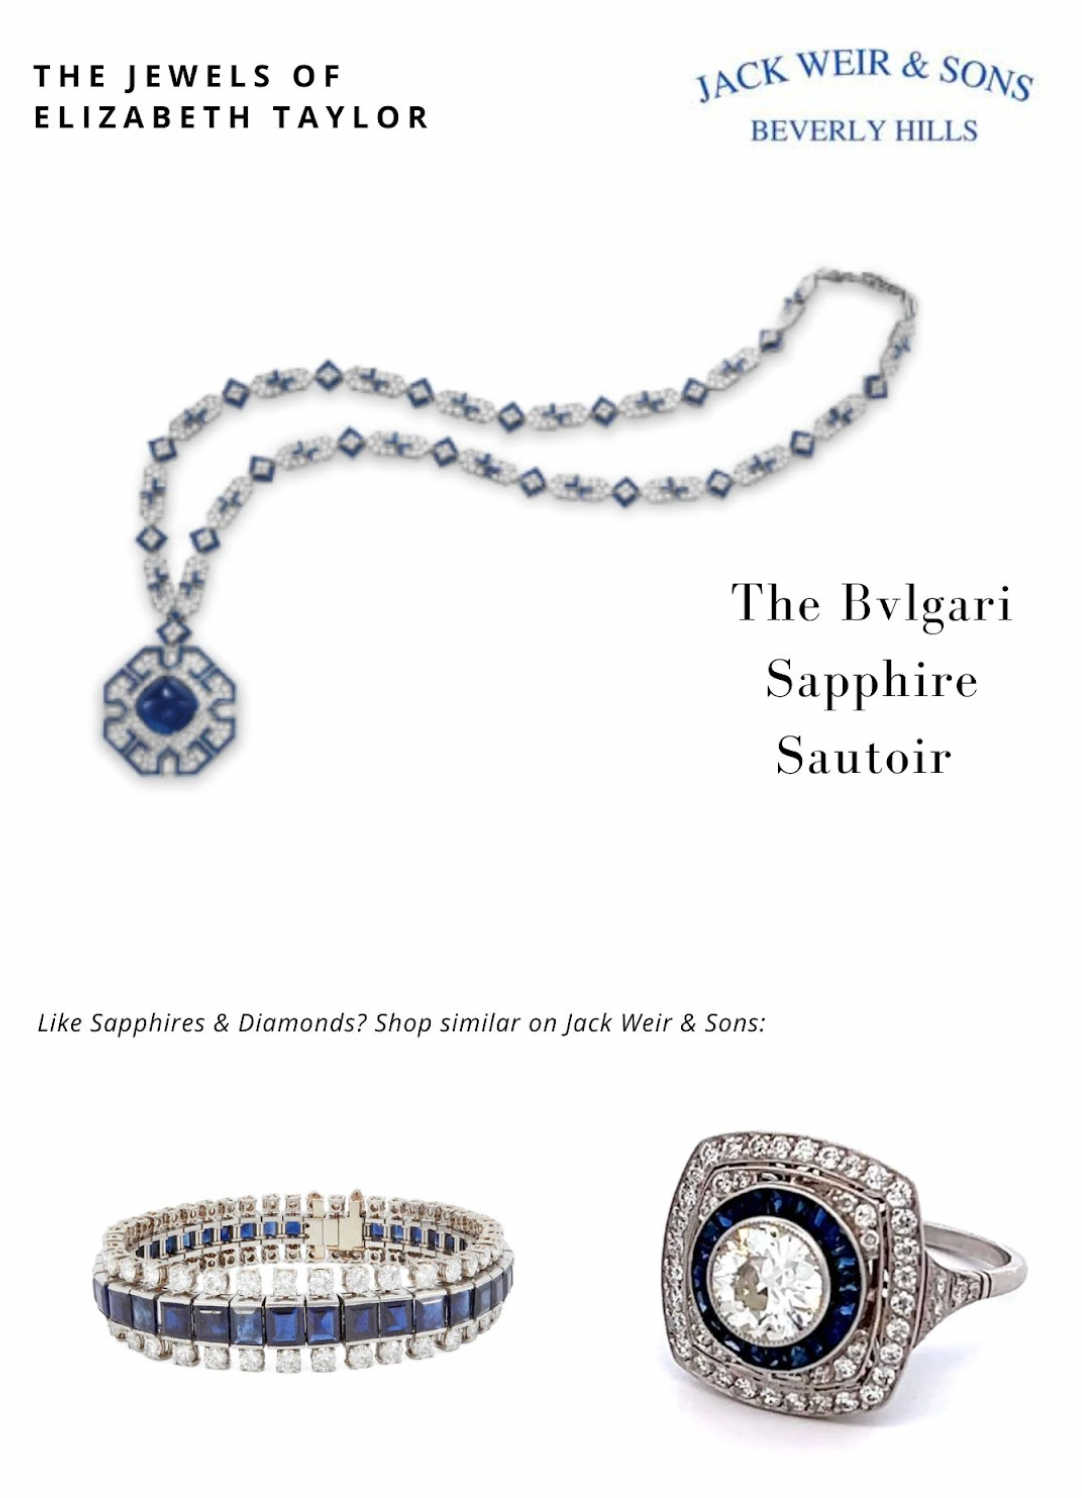 The Jewelry Collection of Elizabeth Taylor – Jack Weir & Sons